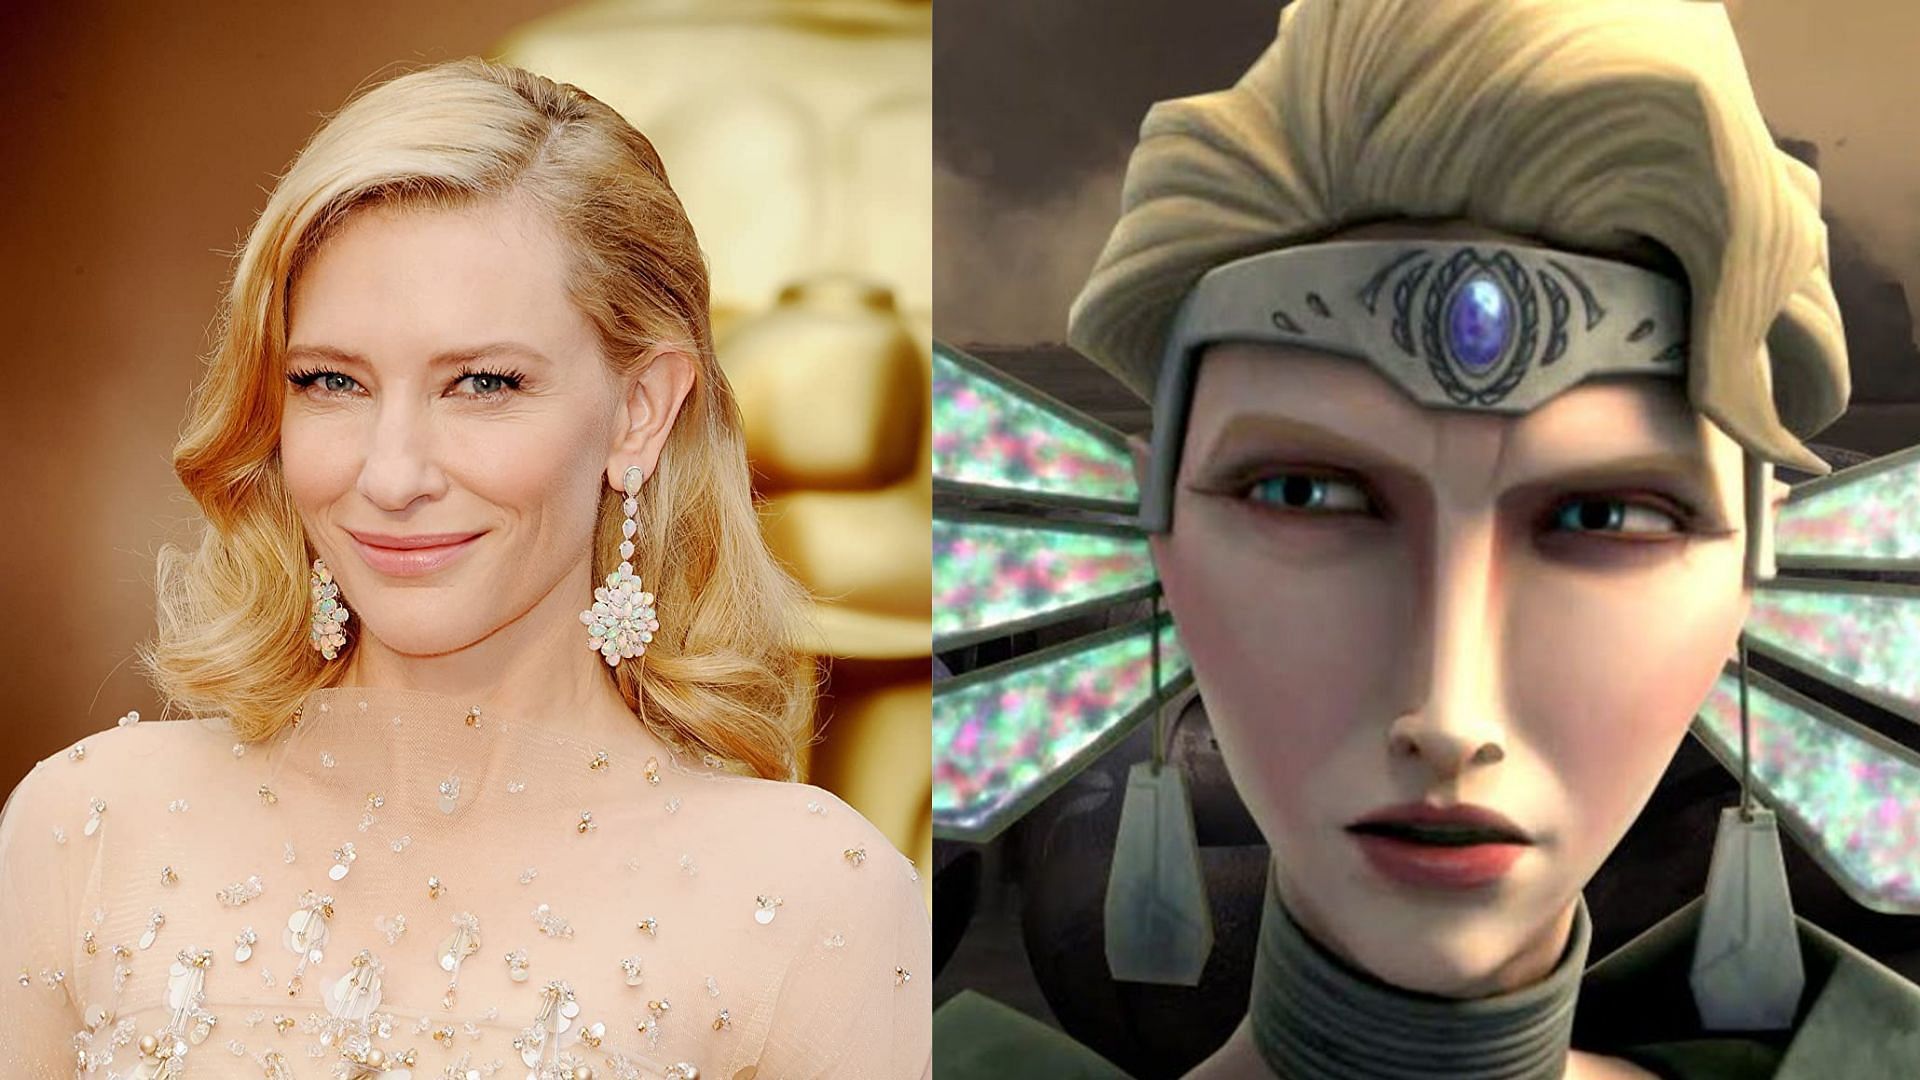 Cate Blanchett would be an amazing Satine Kryze according to Katee Sackhoff (Images via Getty/Lucasfilm)